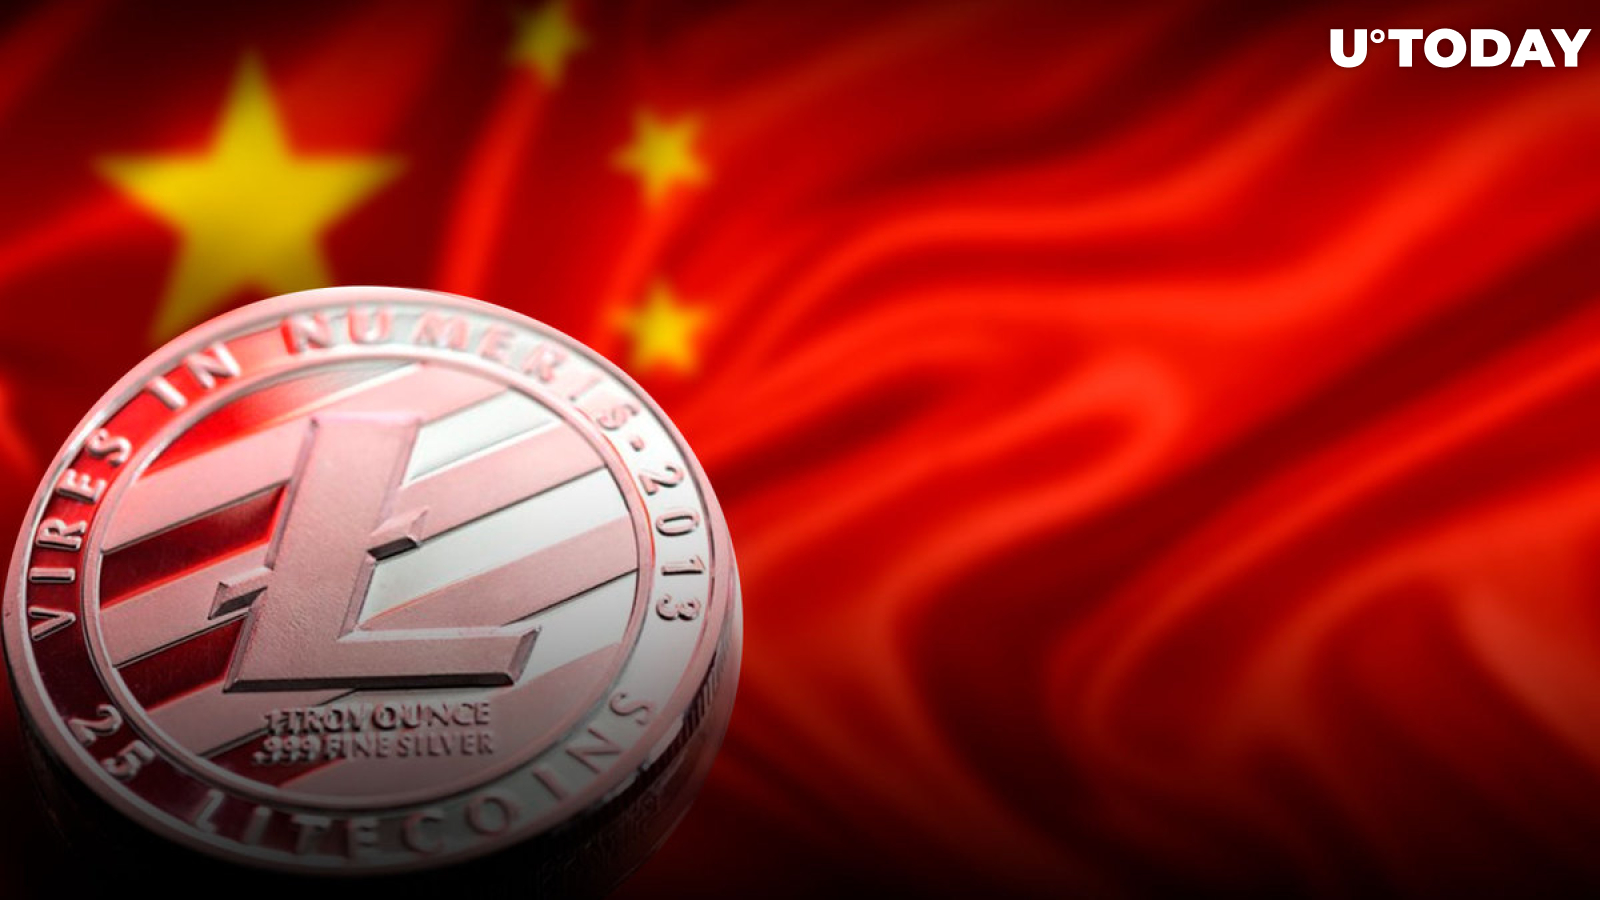 Litecoin Gains Extra Footing in China as Beijing Court Finds It Protected by Property Law